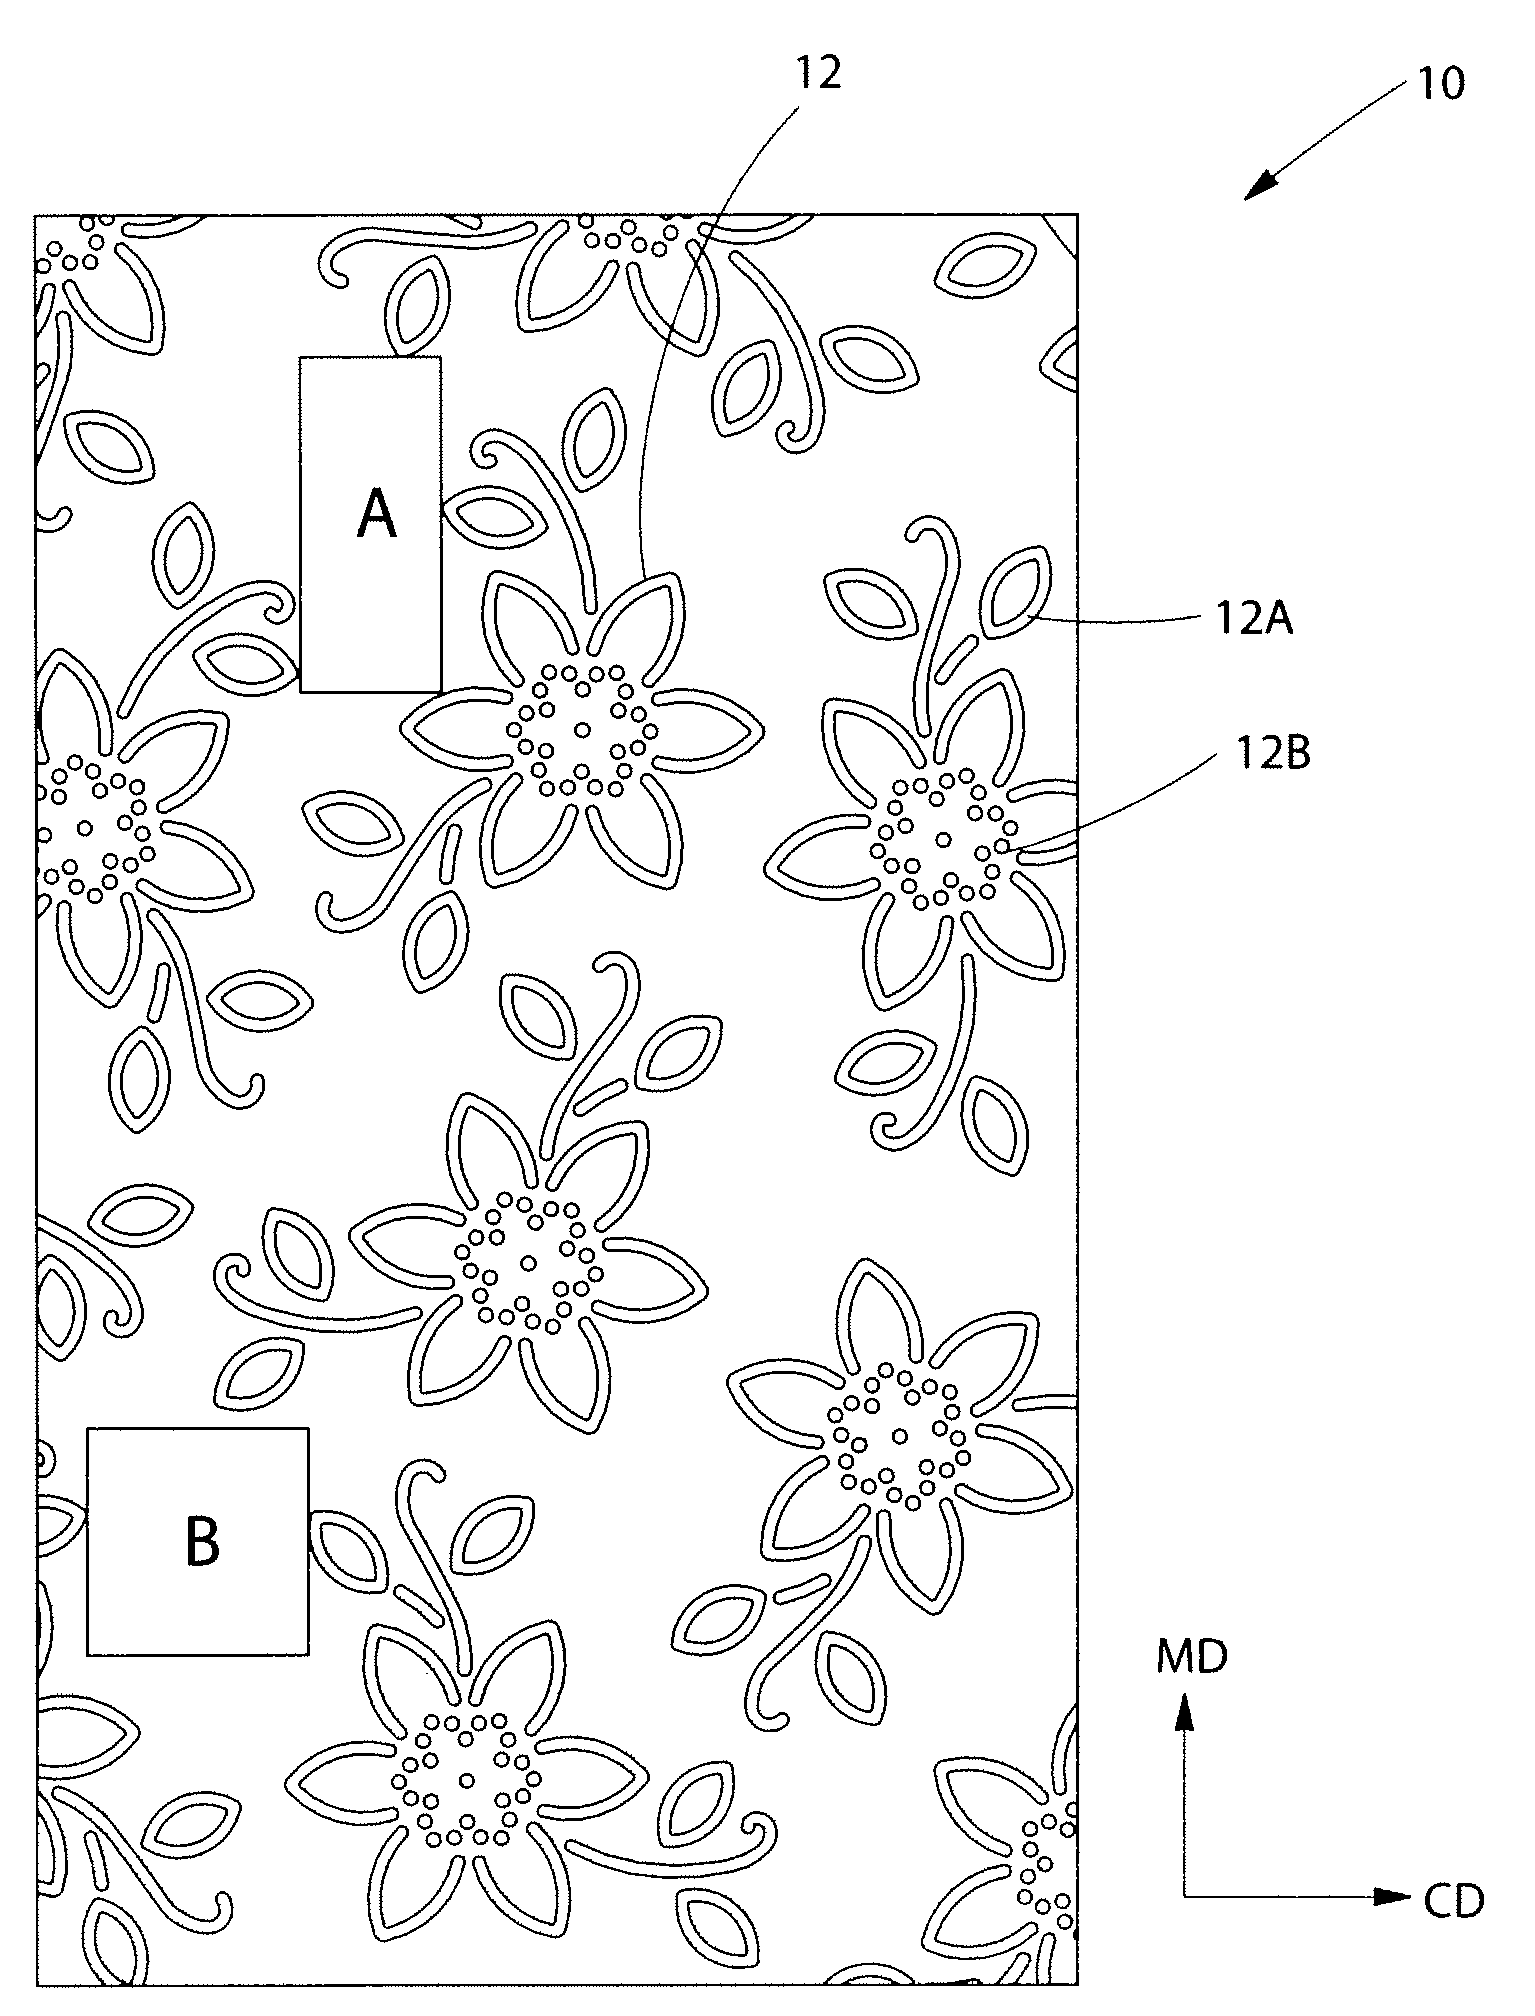 Multi-ply fibrous structures and methods for making same